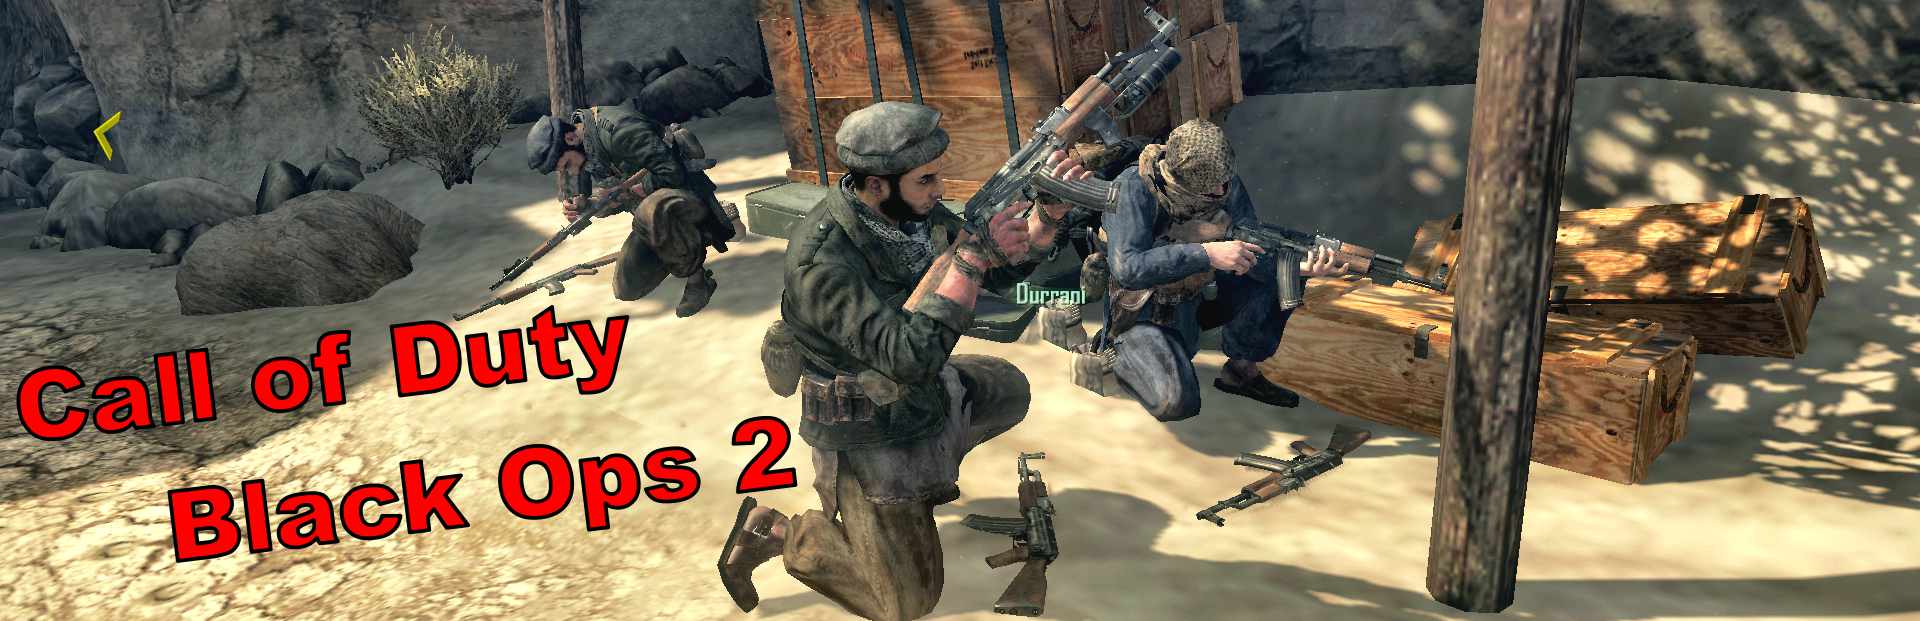 Call of duty black ops 2 highly compressed download for PC just in 12.7 GB